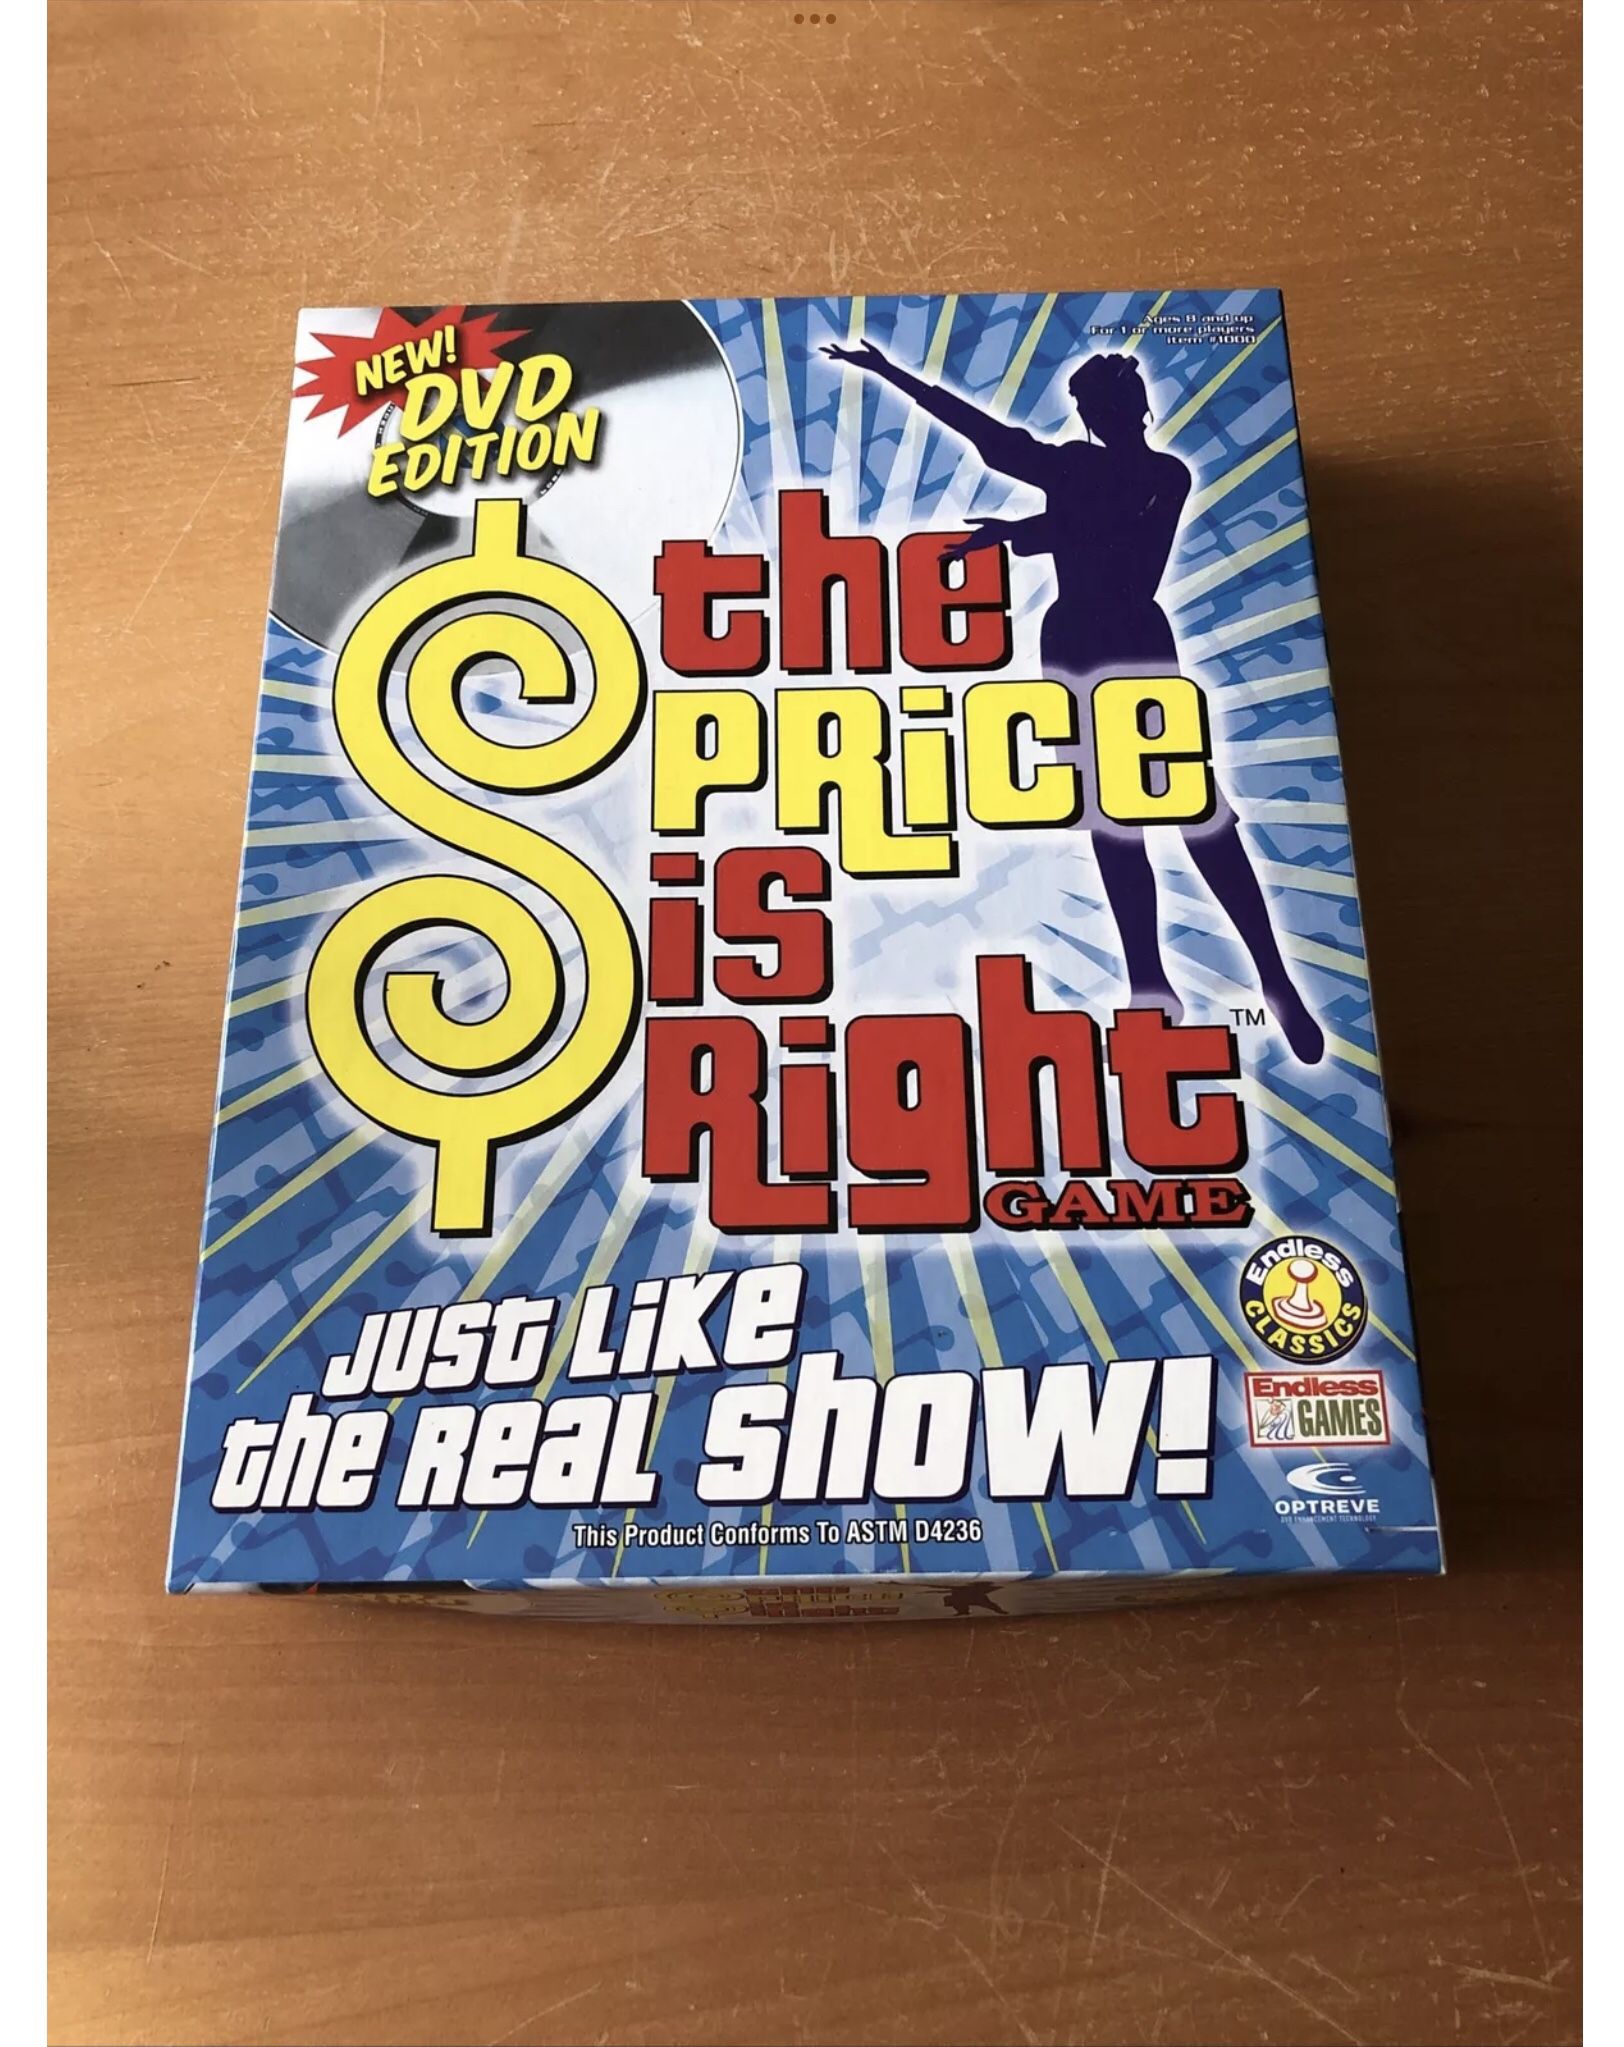 Price Is Right DVD Game And Bun busters VHS